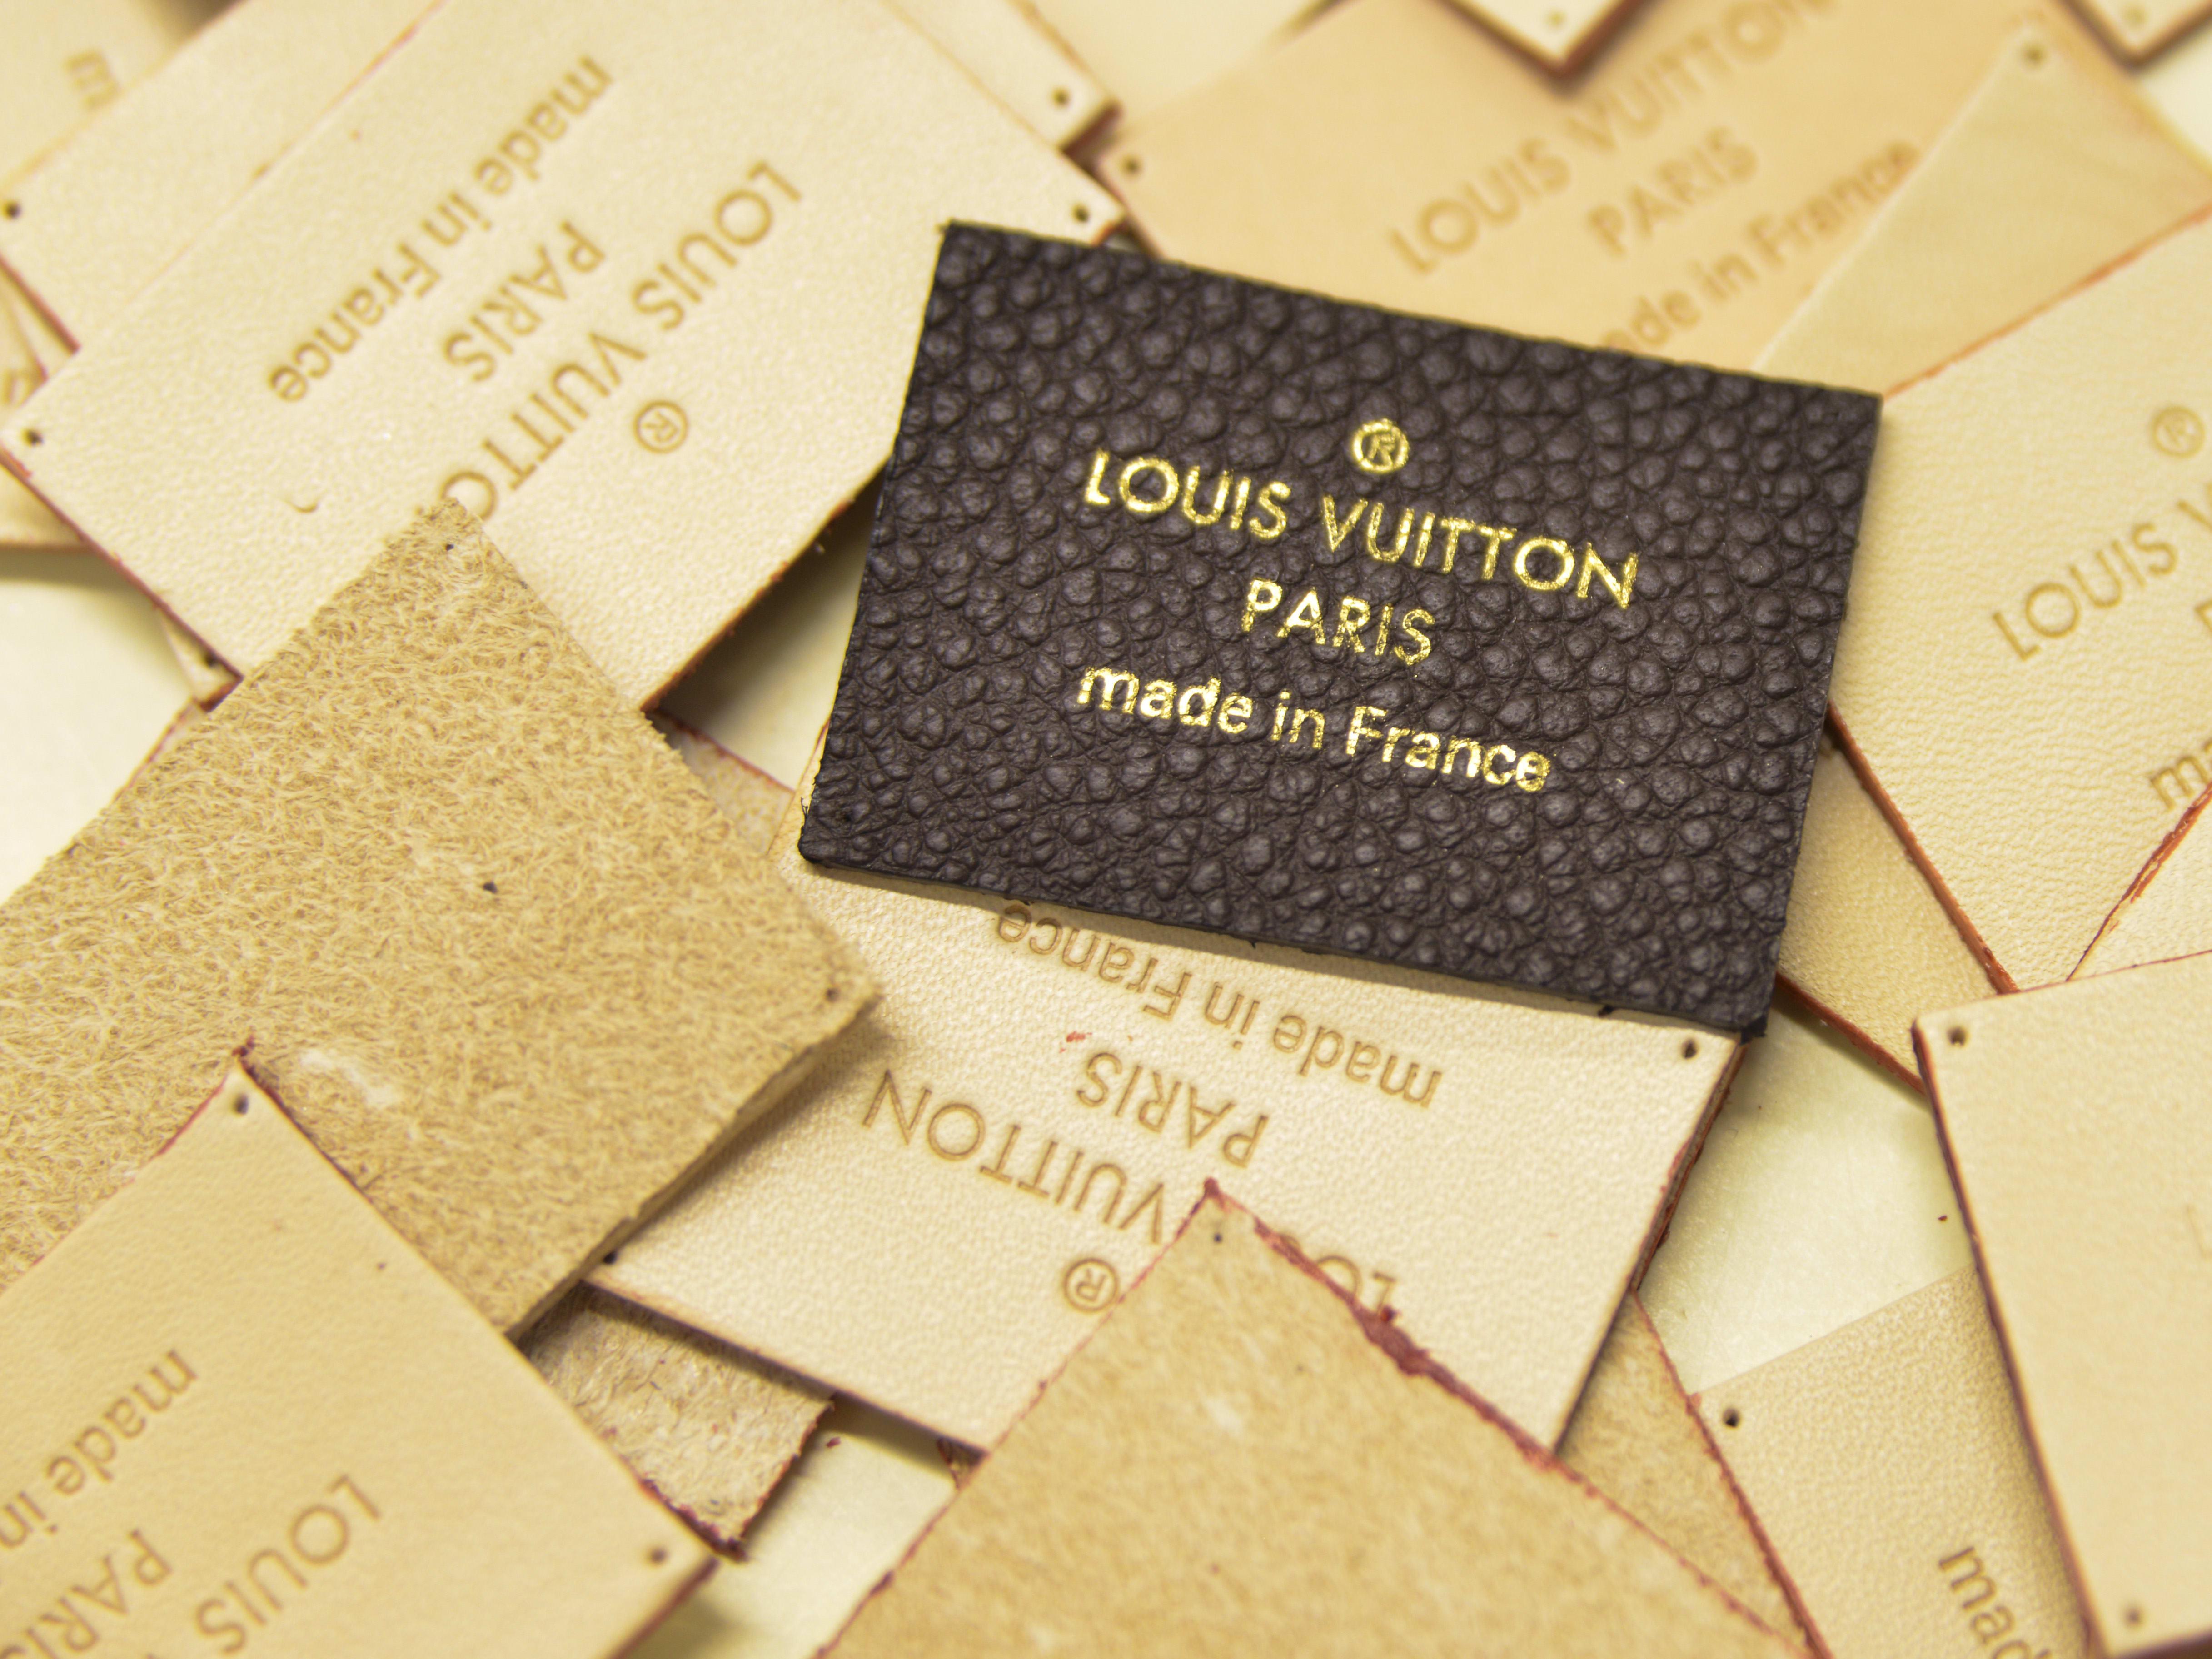 Louis Vuitton Headquarters - Paris, Step inside Louis Vuitton with a 360°  look at the different ateliers and exceptional spaces of the Maison from  LVMH, now at